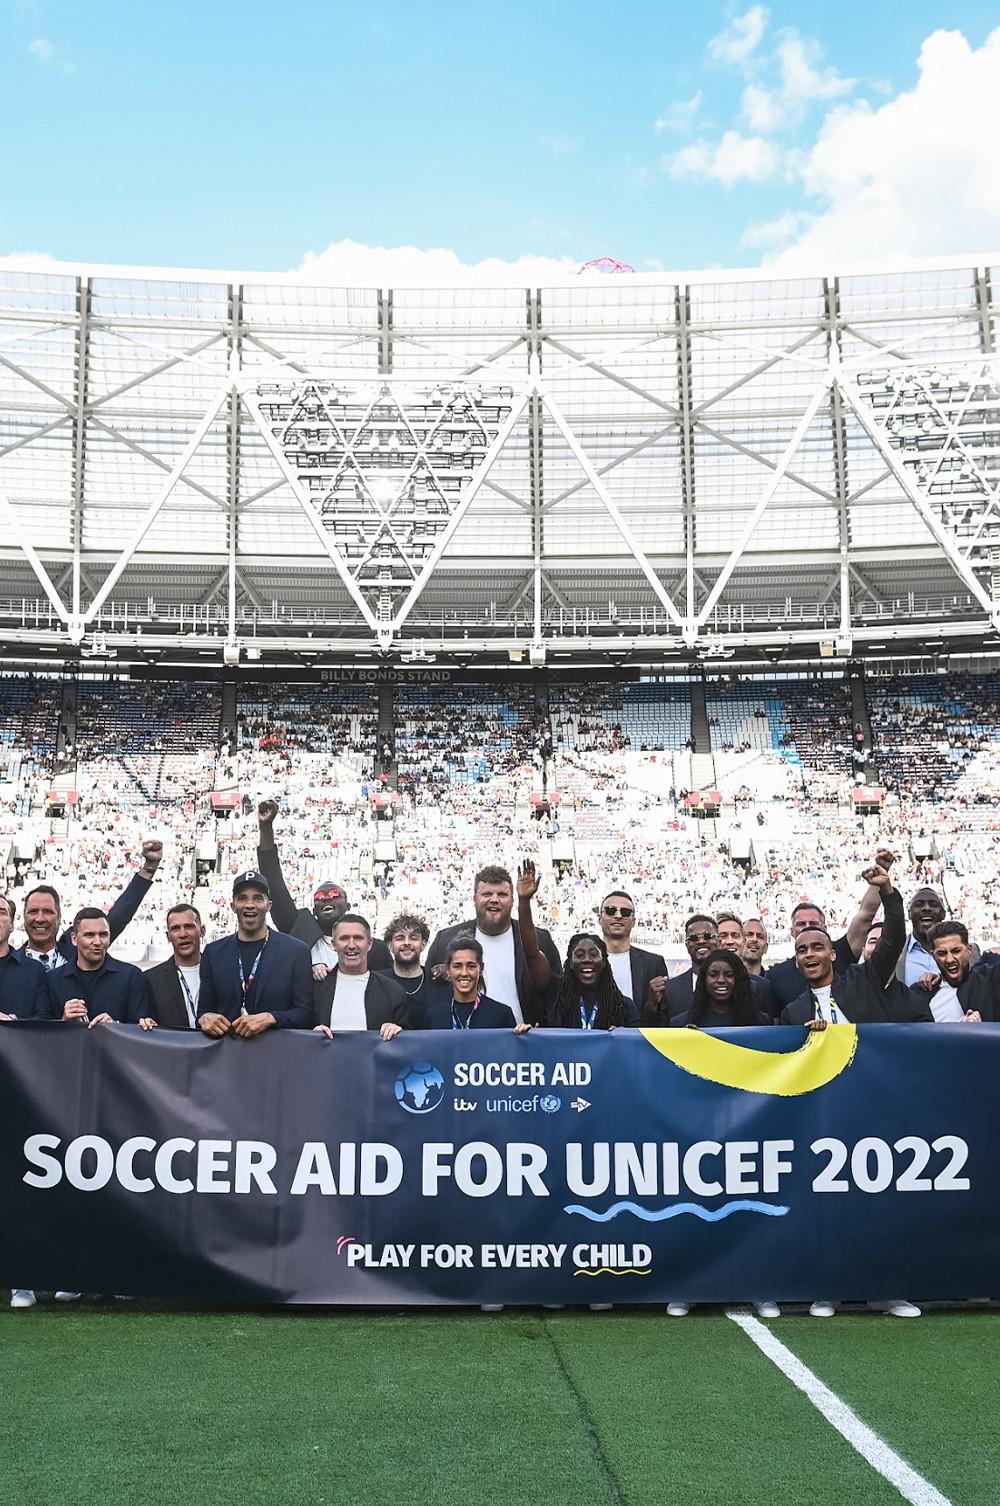 Group shot for Soccer Aid 2022